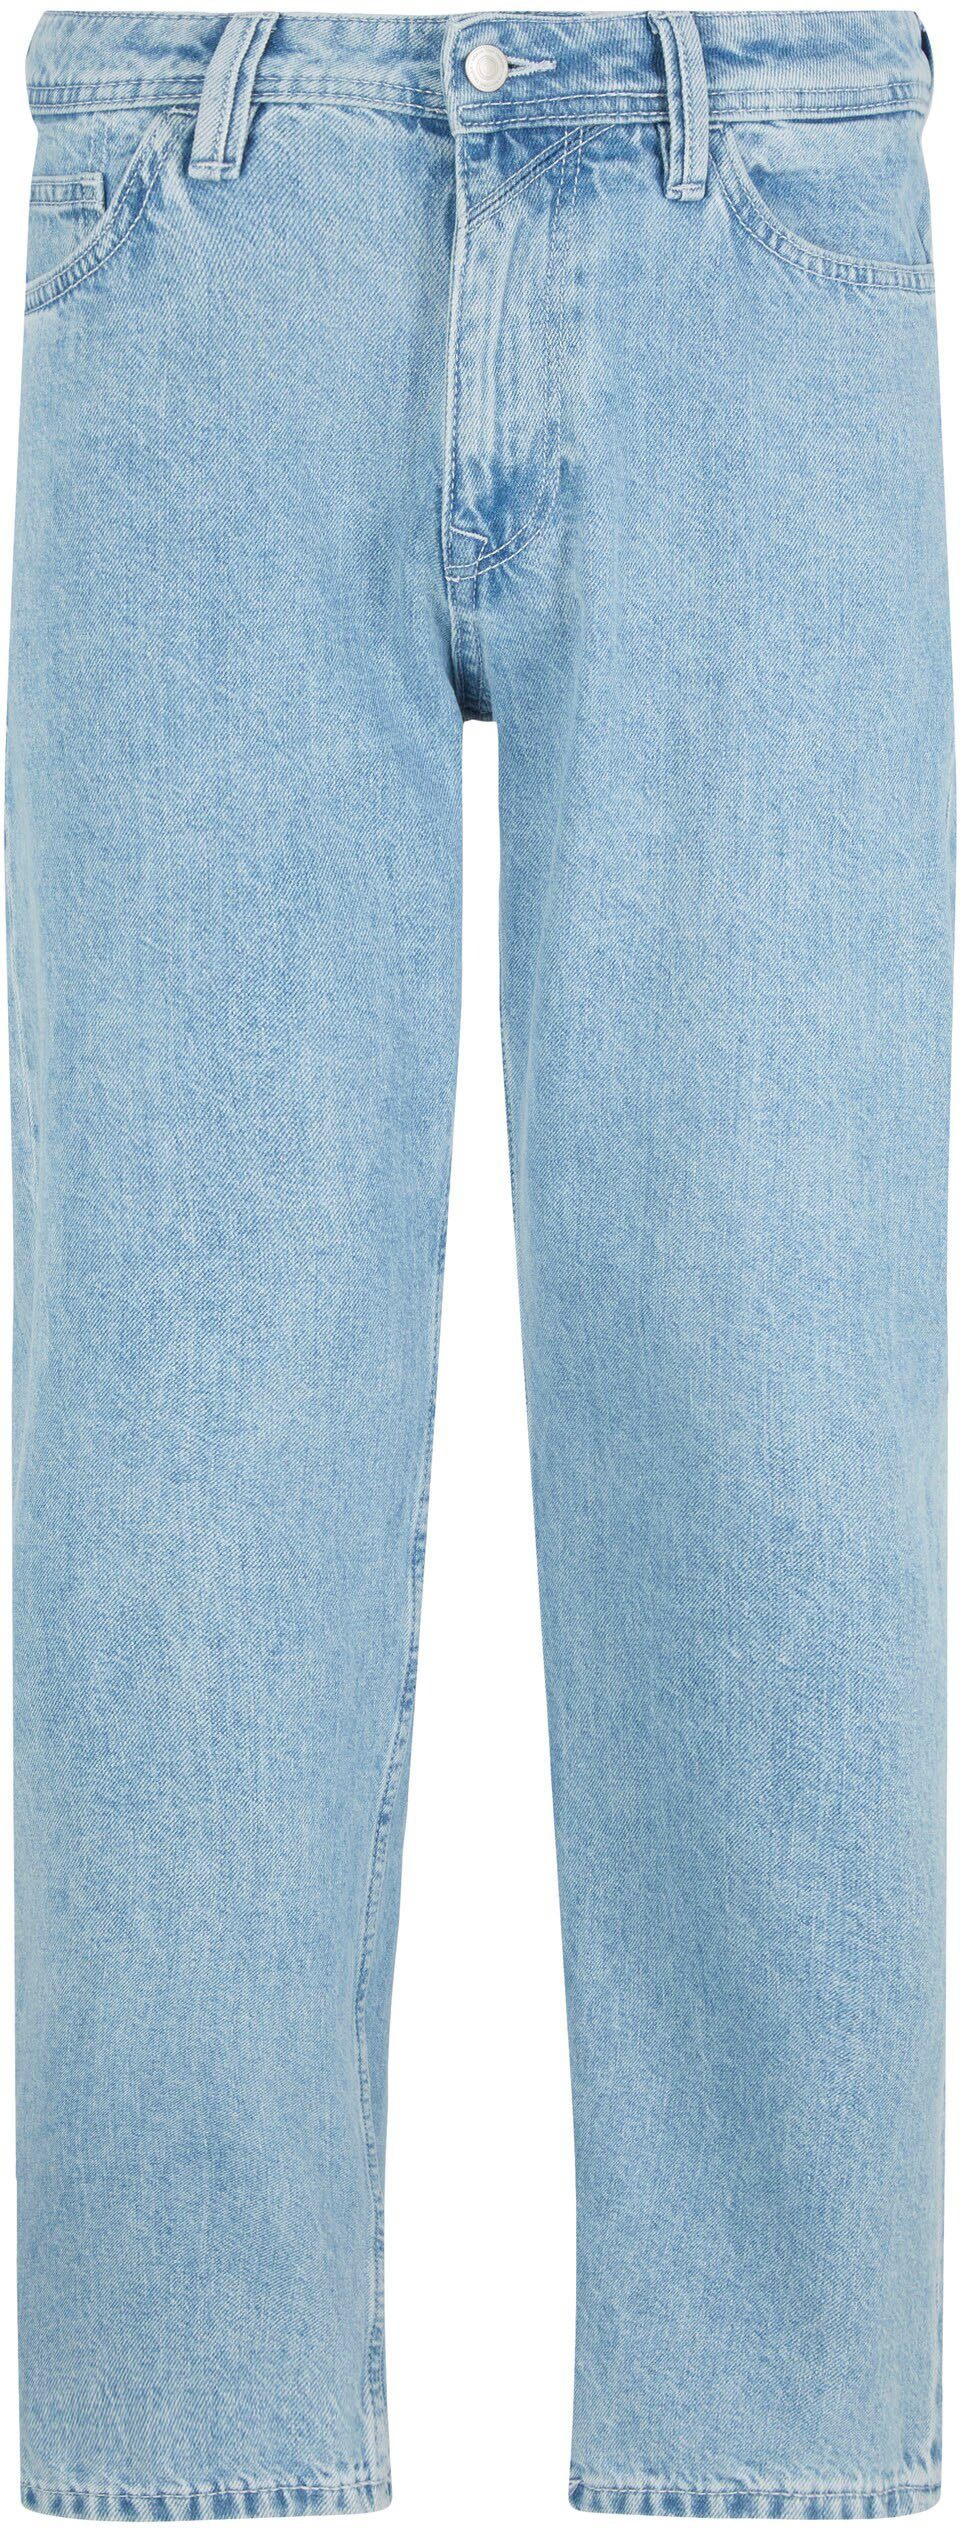 TOM TAILOR Denim Straight-Jeans bleached clean